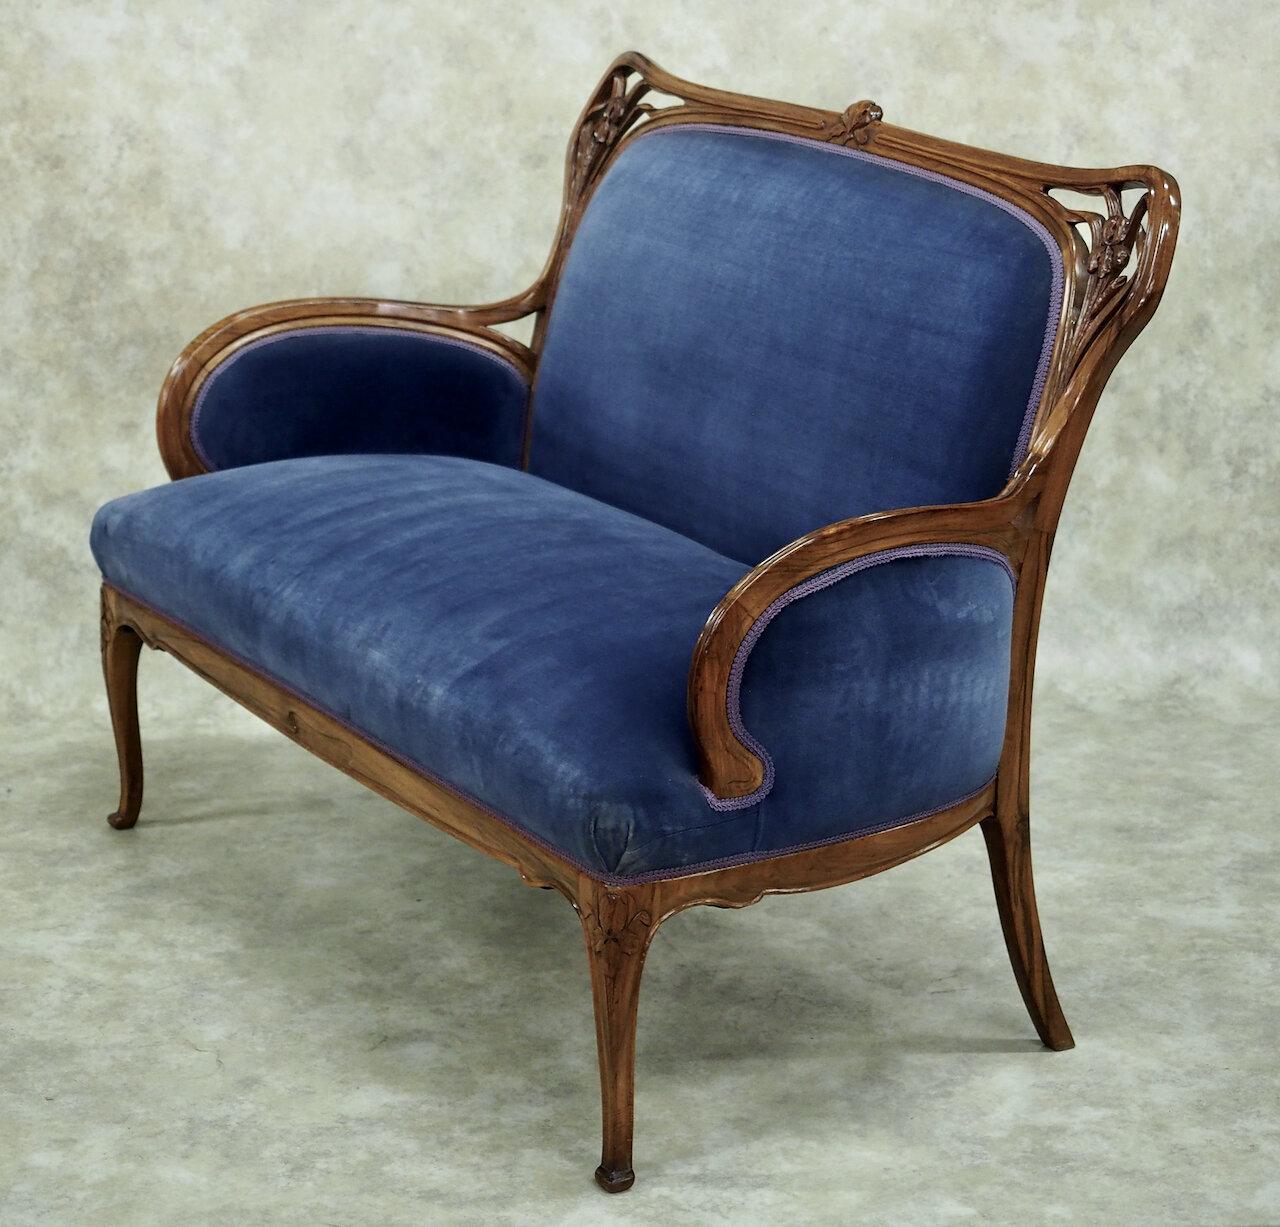 French Art Nouveau seating suite by Plumet et Selmersheim, circa 1900, in solid sculpted rosewood. Set consists of settee, pair of armchairs, pair of side chairs, all refinished and reupholstered. 

Dimensions: 
Settee 52” wide x 22” deep x 38”